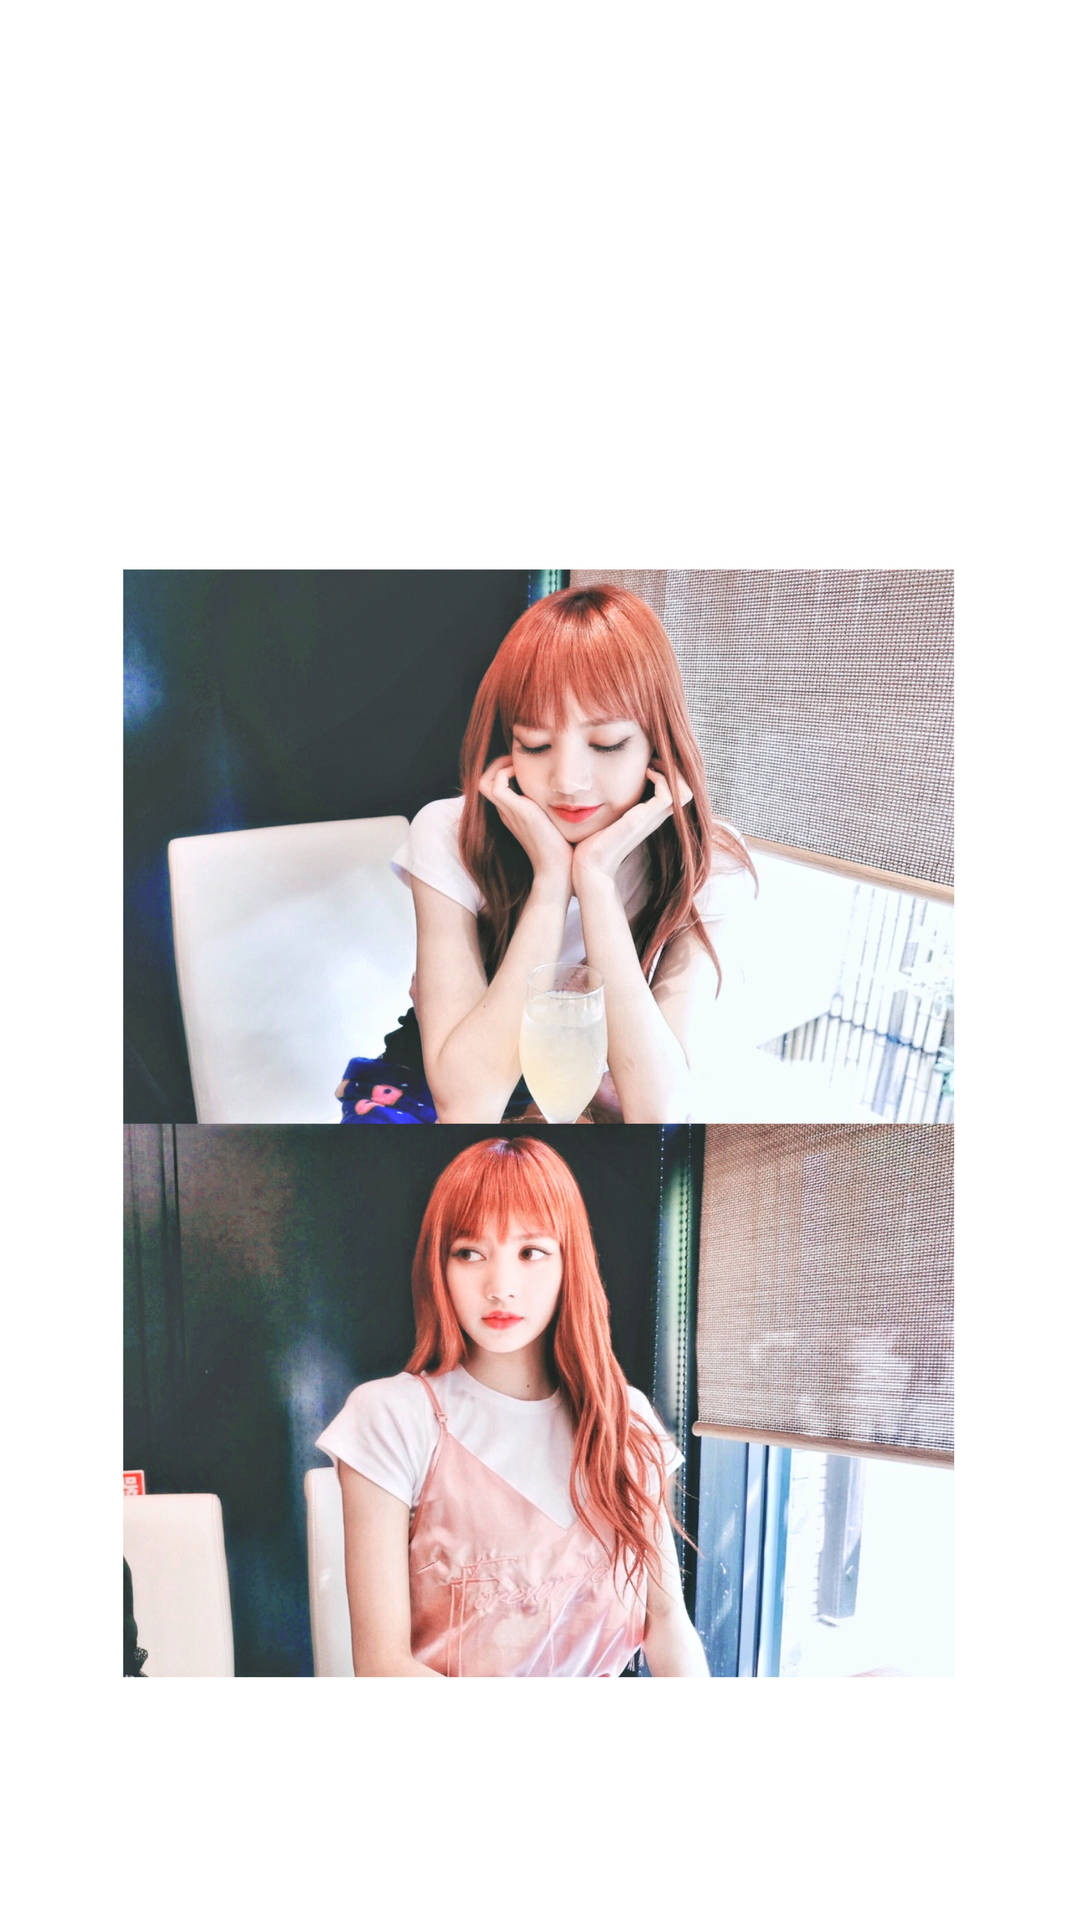 Blackpink Lisa Two Pictures In One Wallpaper